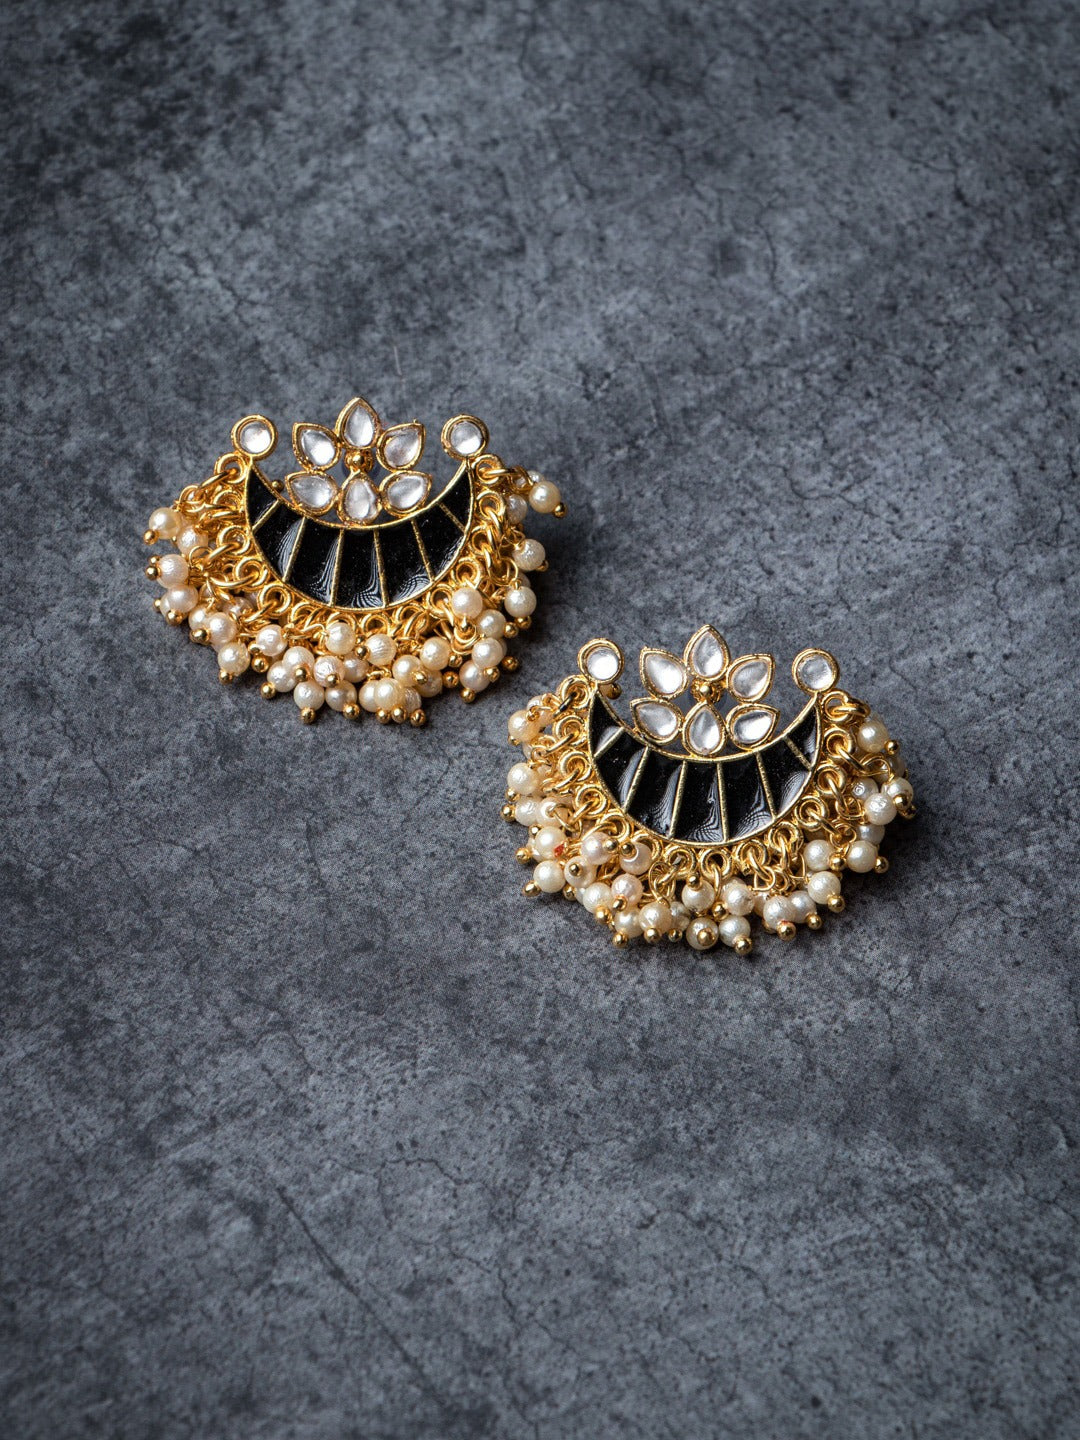 Women's Black & Gold-Toned Contemporary Studs Earrings - Morkanth